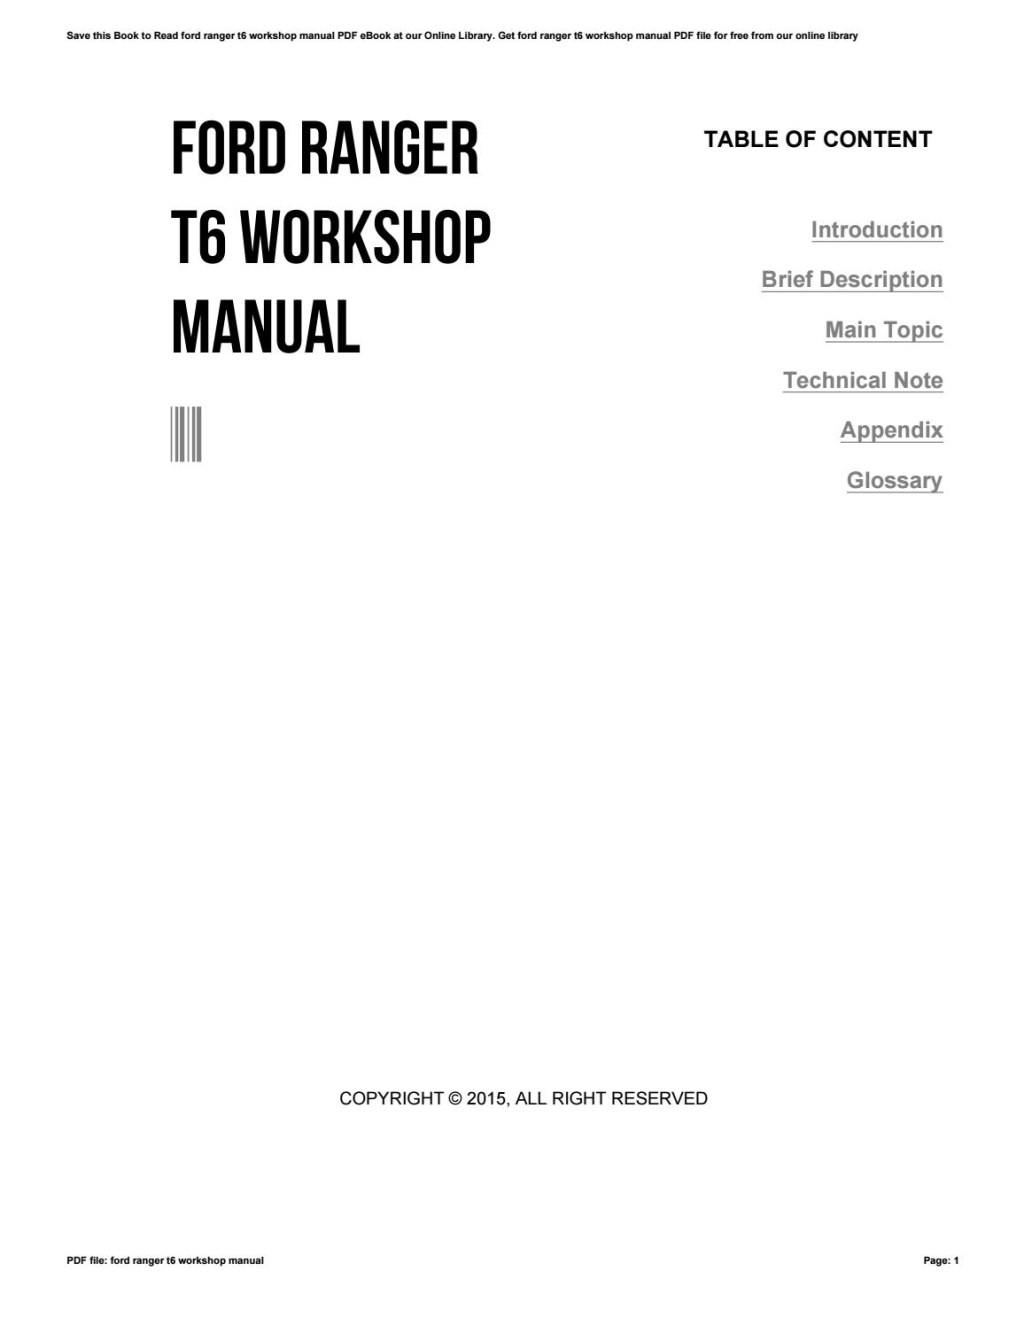 Picture of: Ford ranger t workshop manual by szerz – Issuu